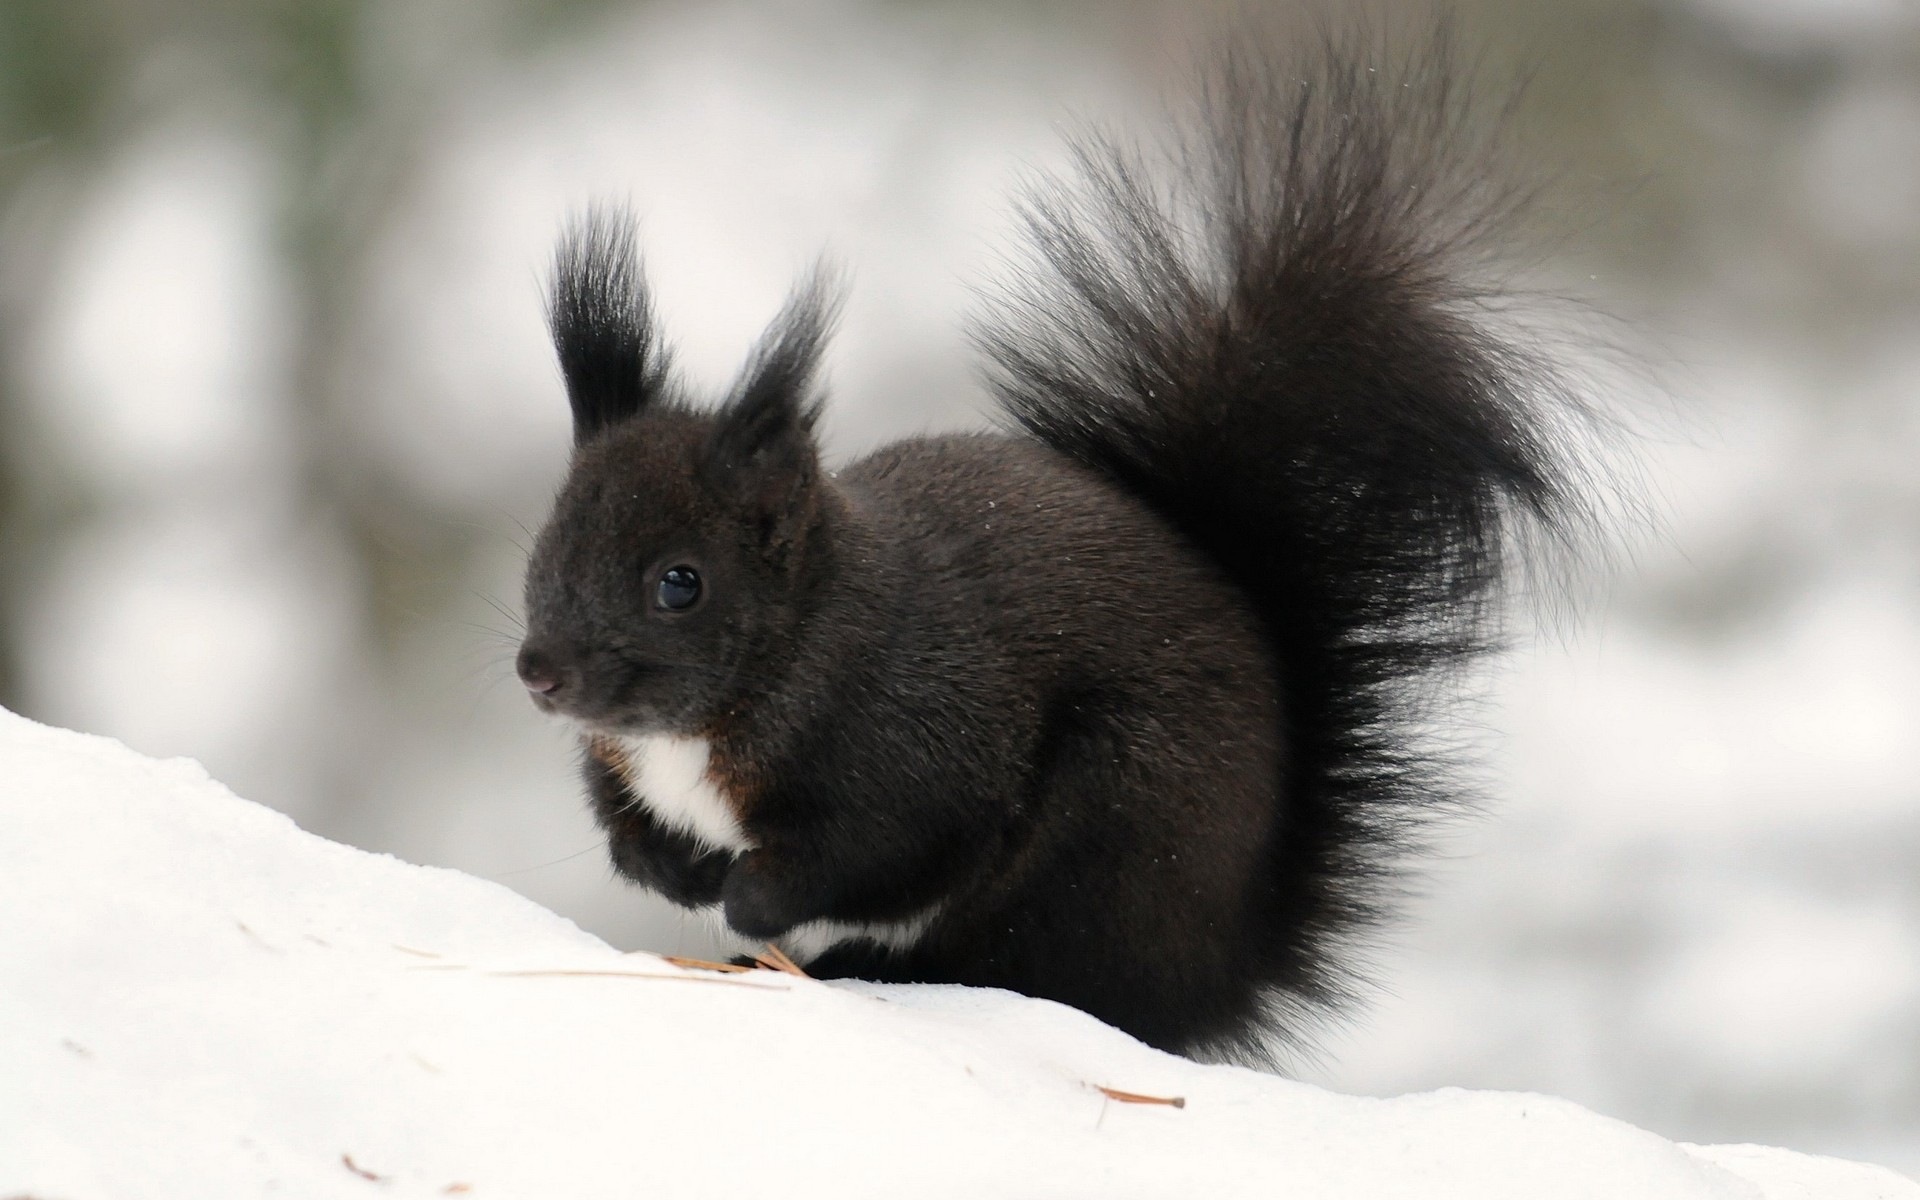 Animal close-up, cute squirrel HD wallpapers #7 - 1920x1200